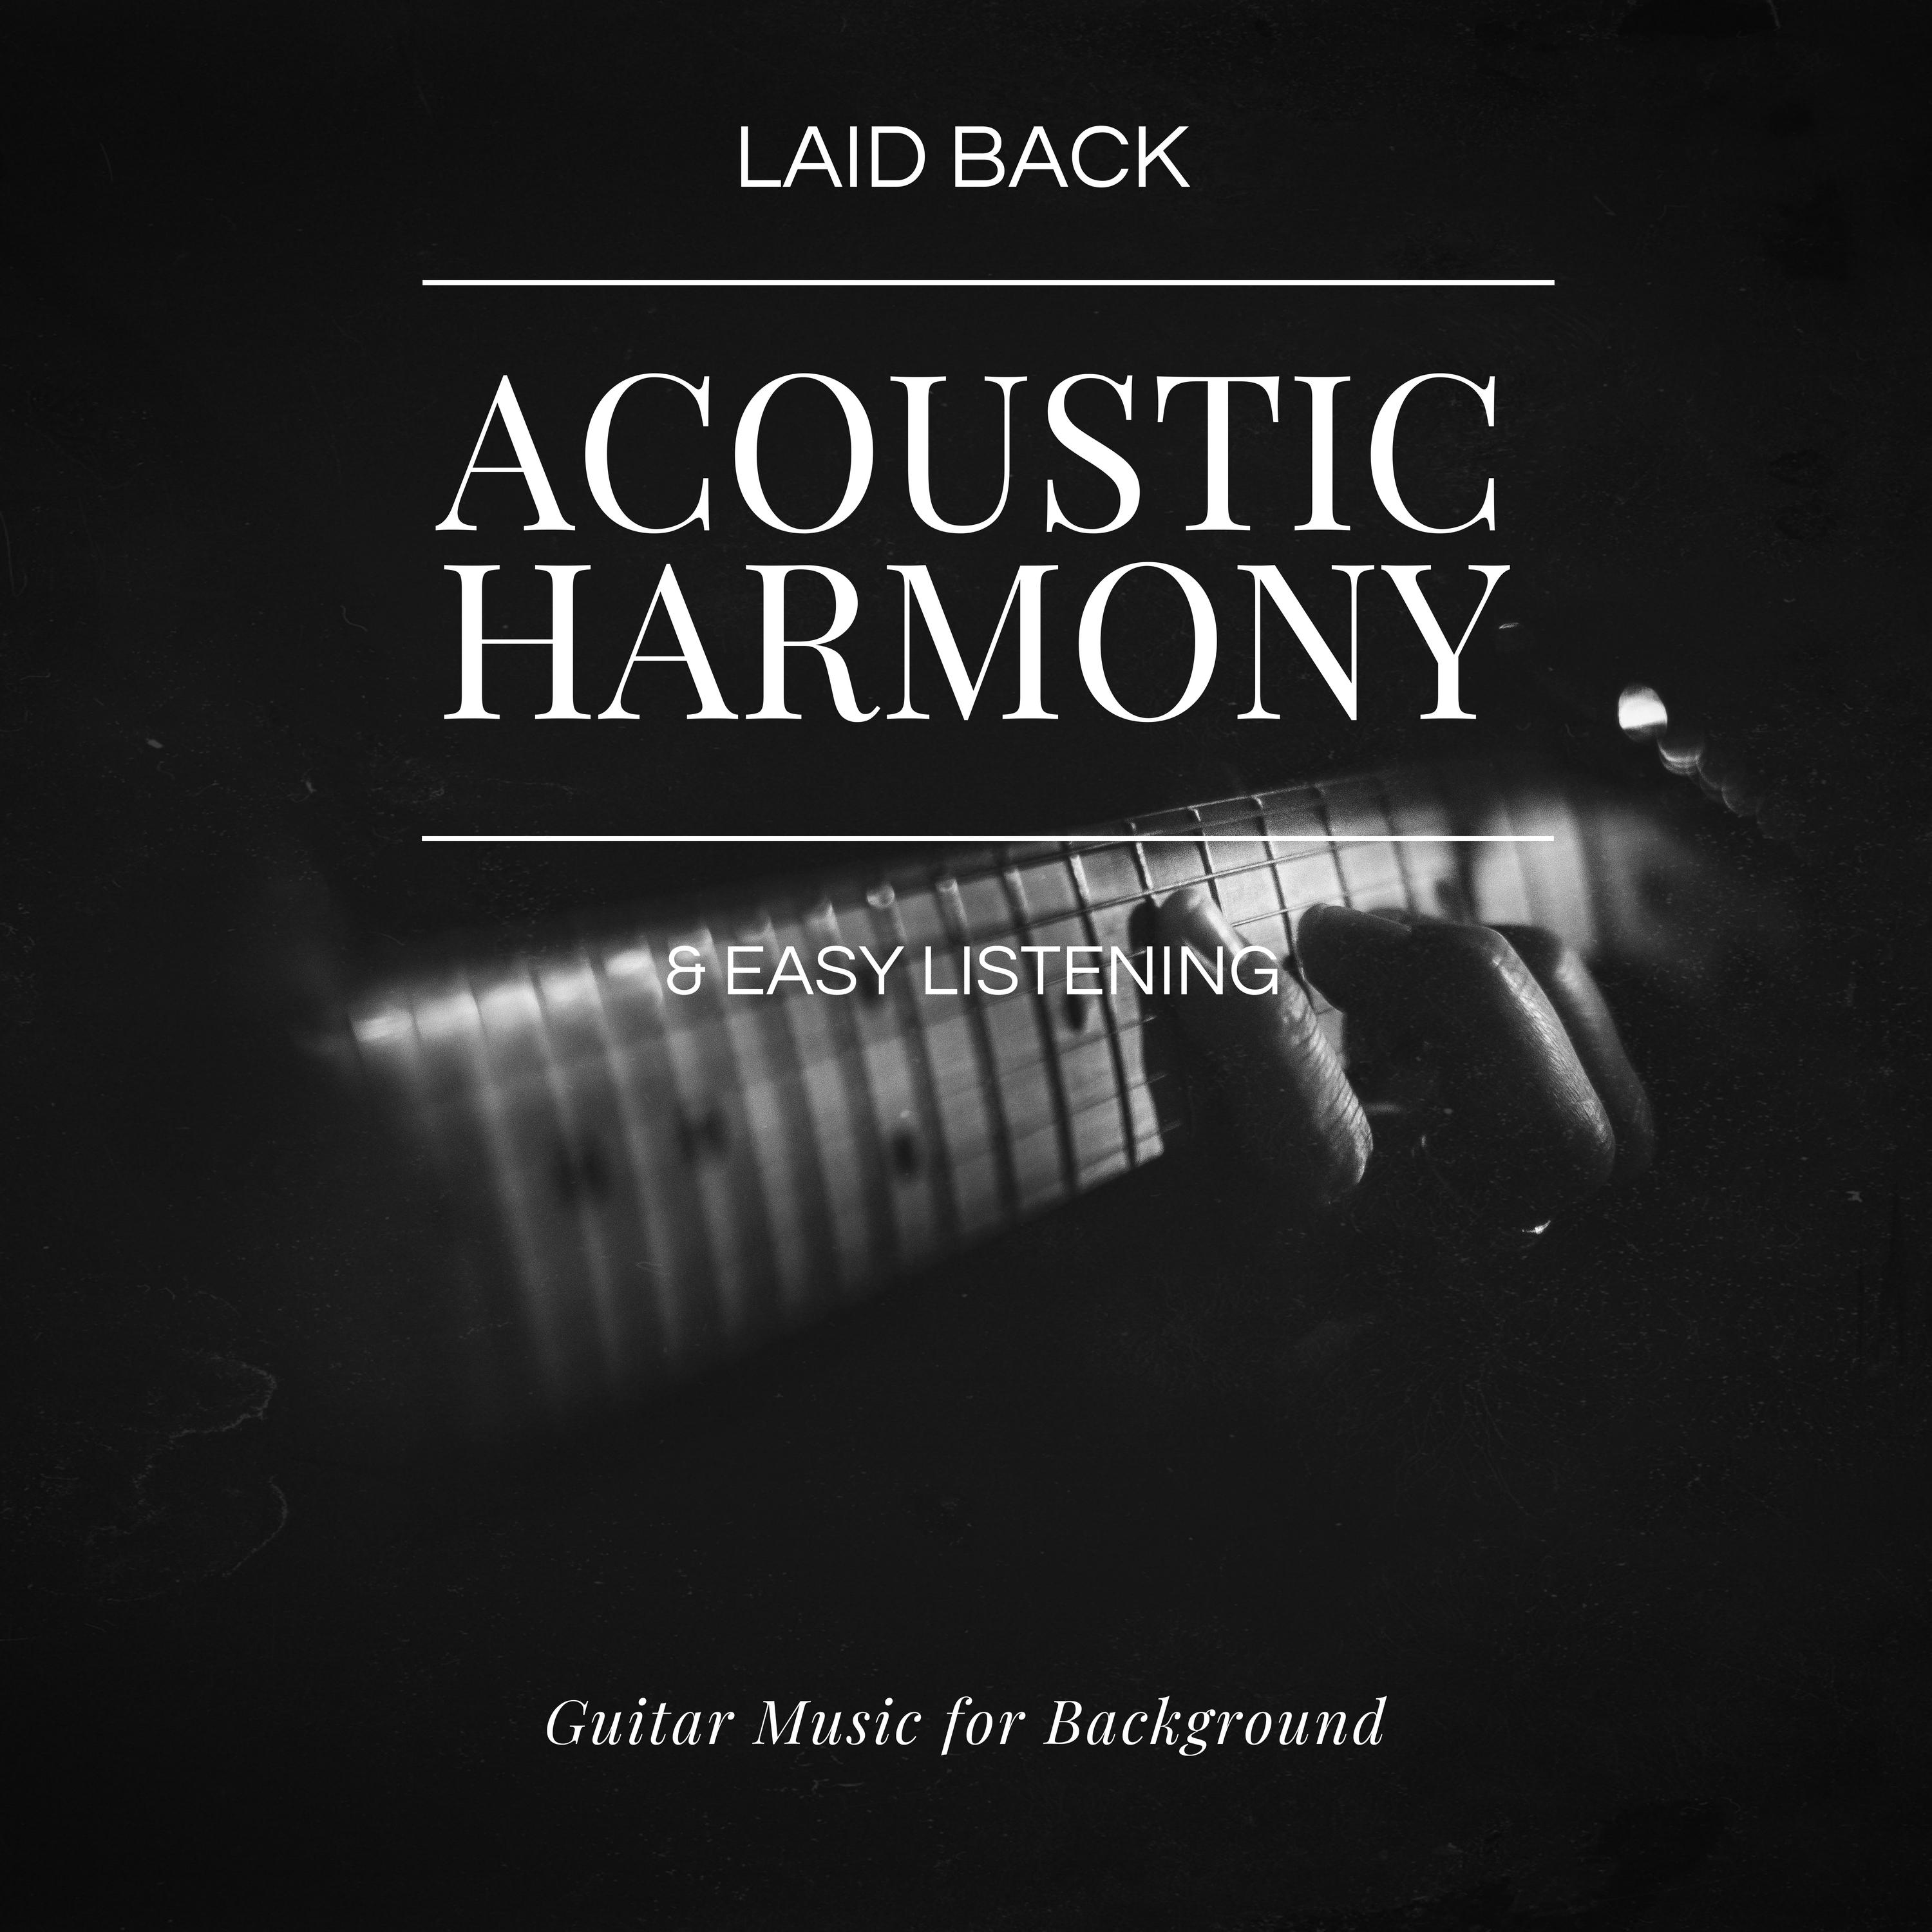 Acoustic Harmony: Laid Back & Easy Listening Guitar Music For Background